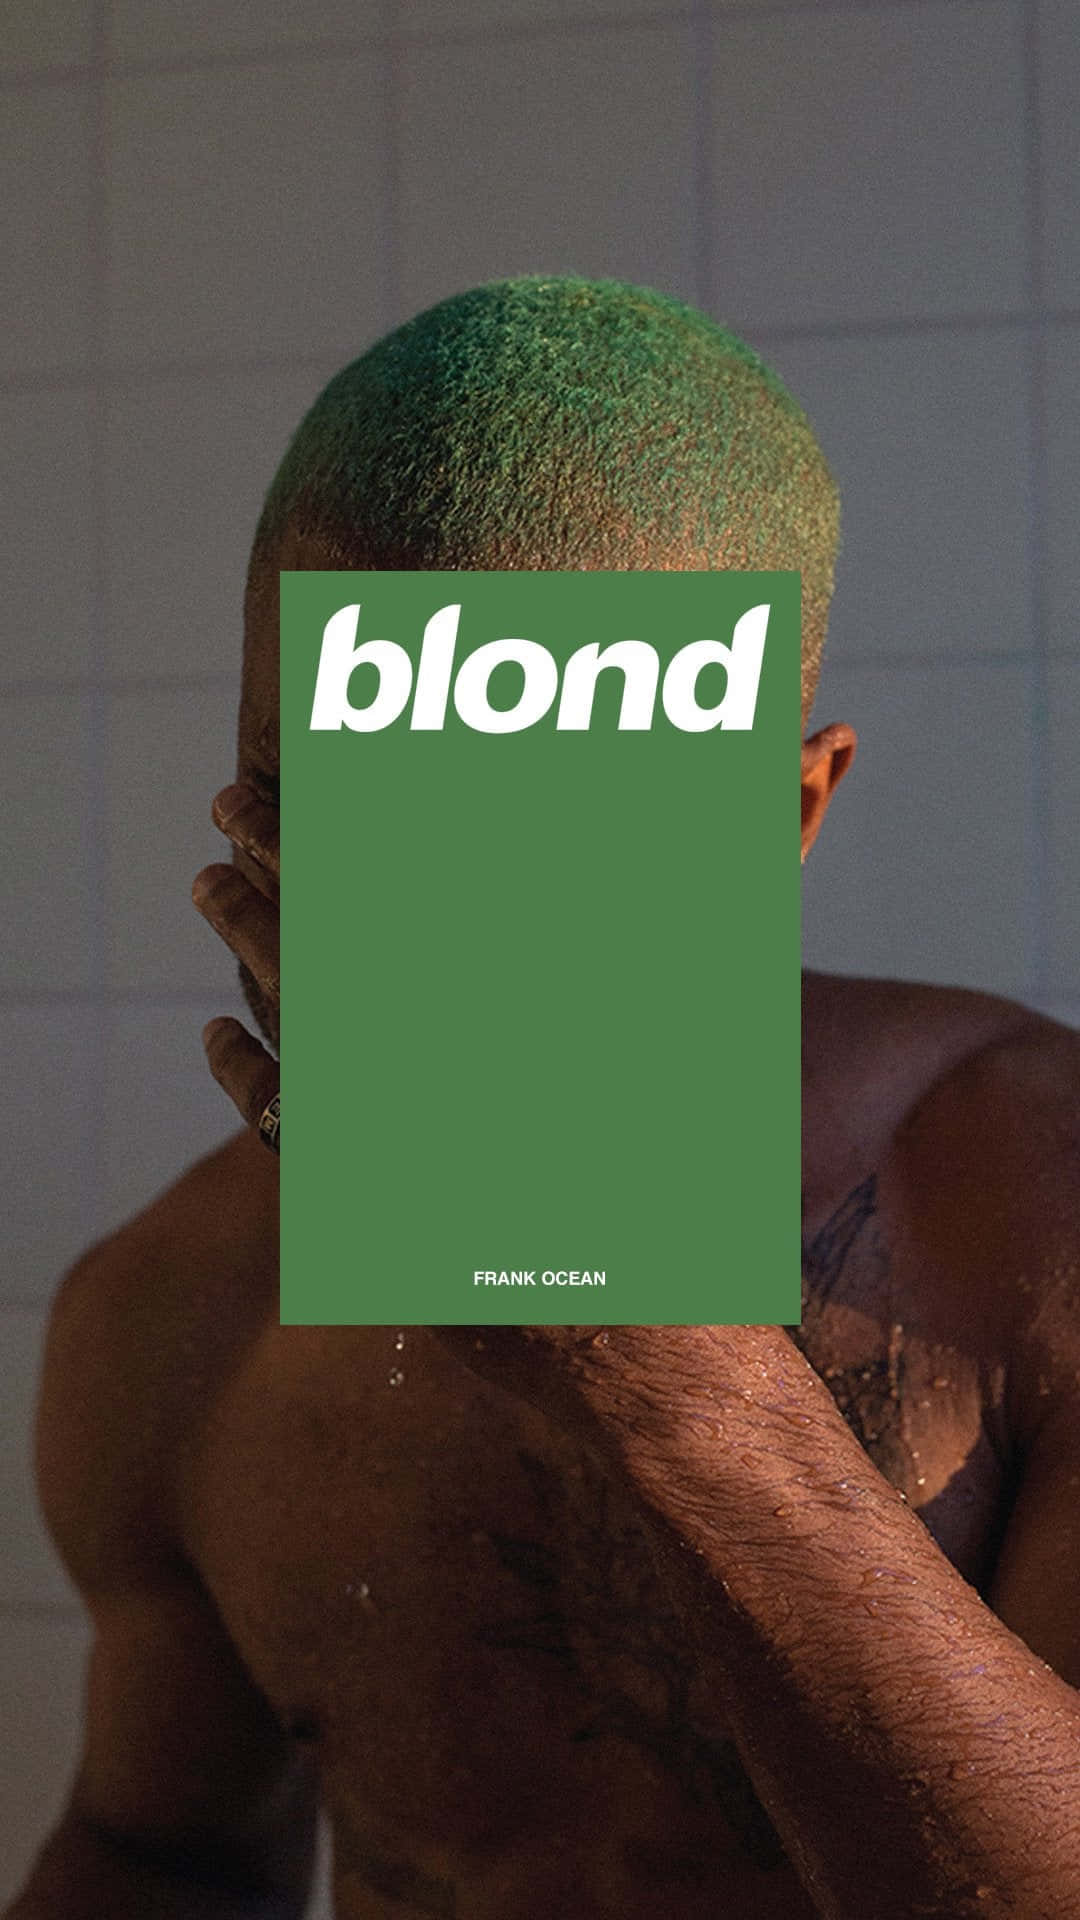 Frank Ocean in his critically acclaimed 2016 album Blonde Wallpaper